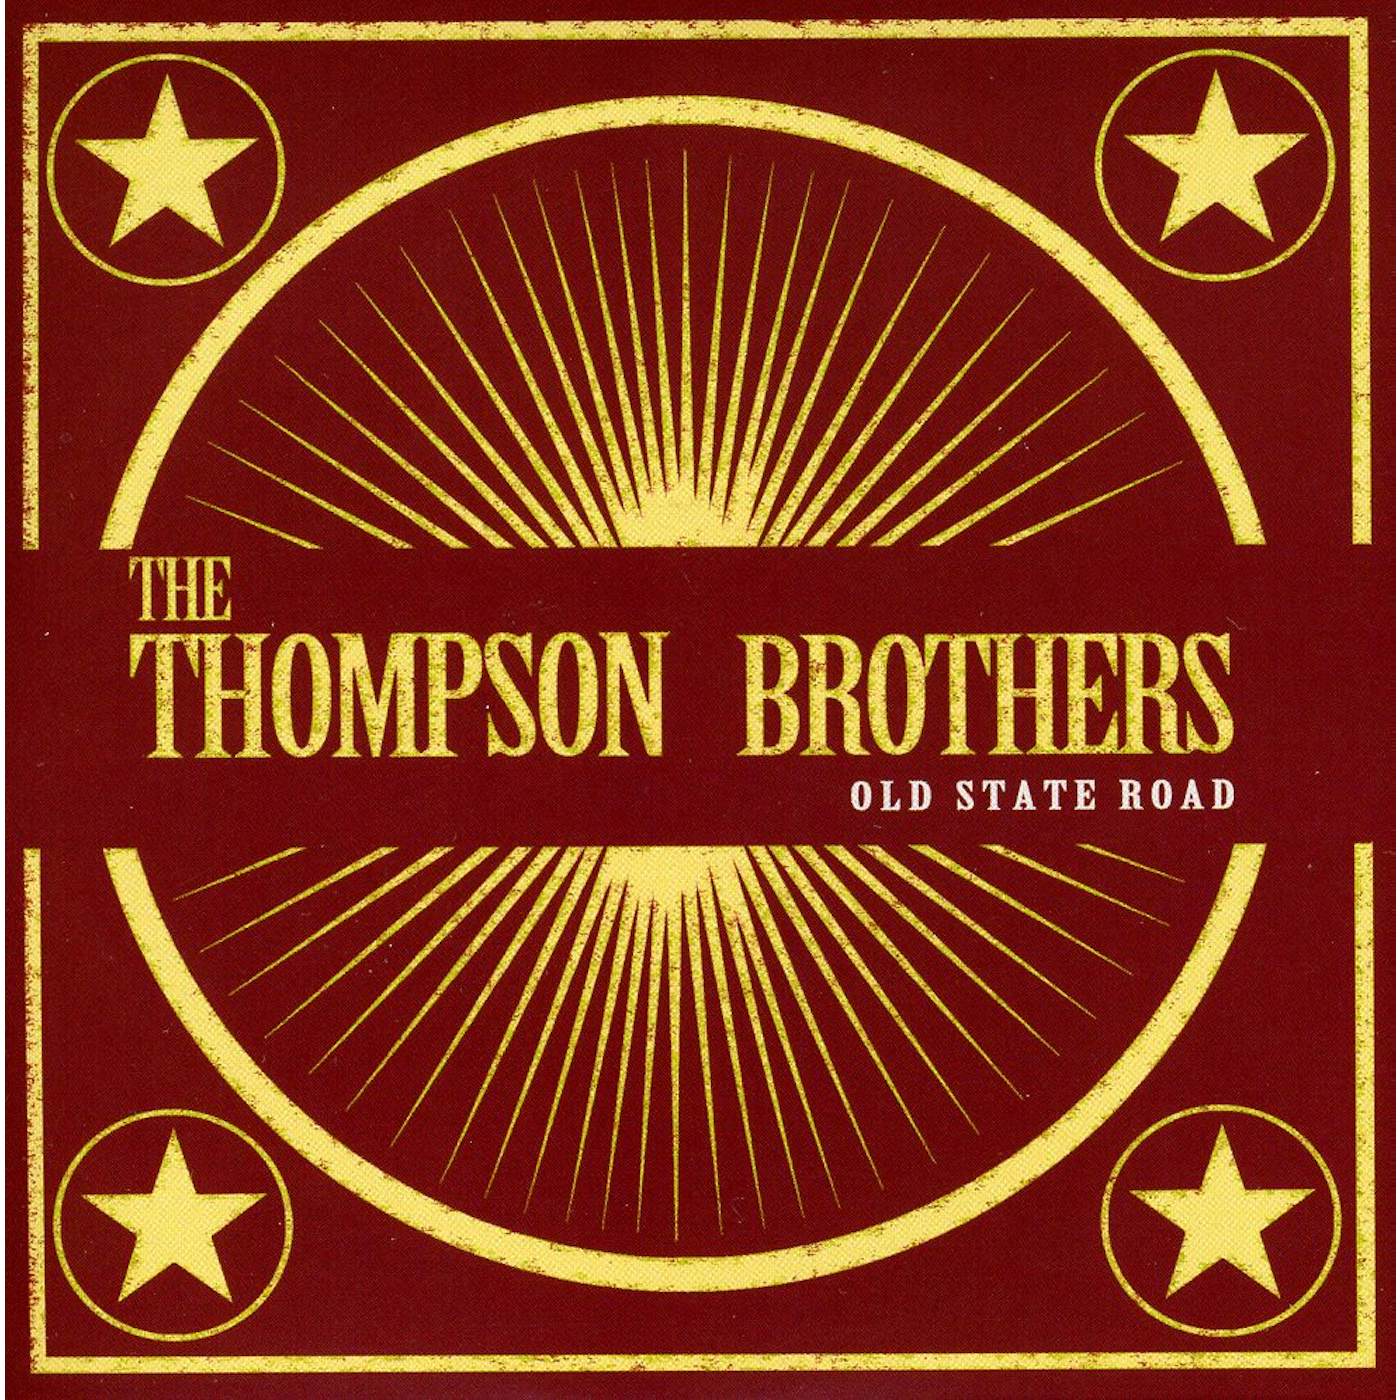 The Thompson Brothers OLD STATE ROAD CD